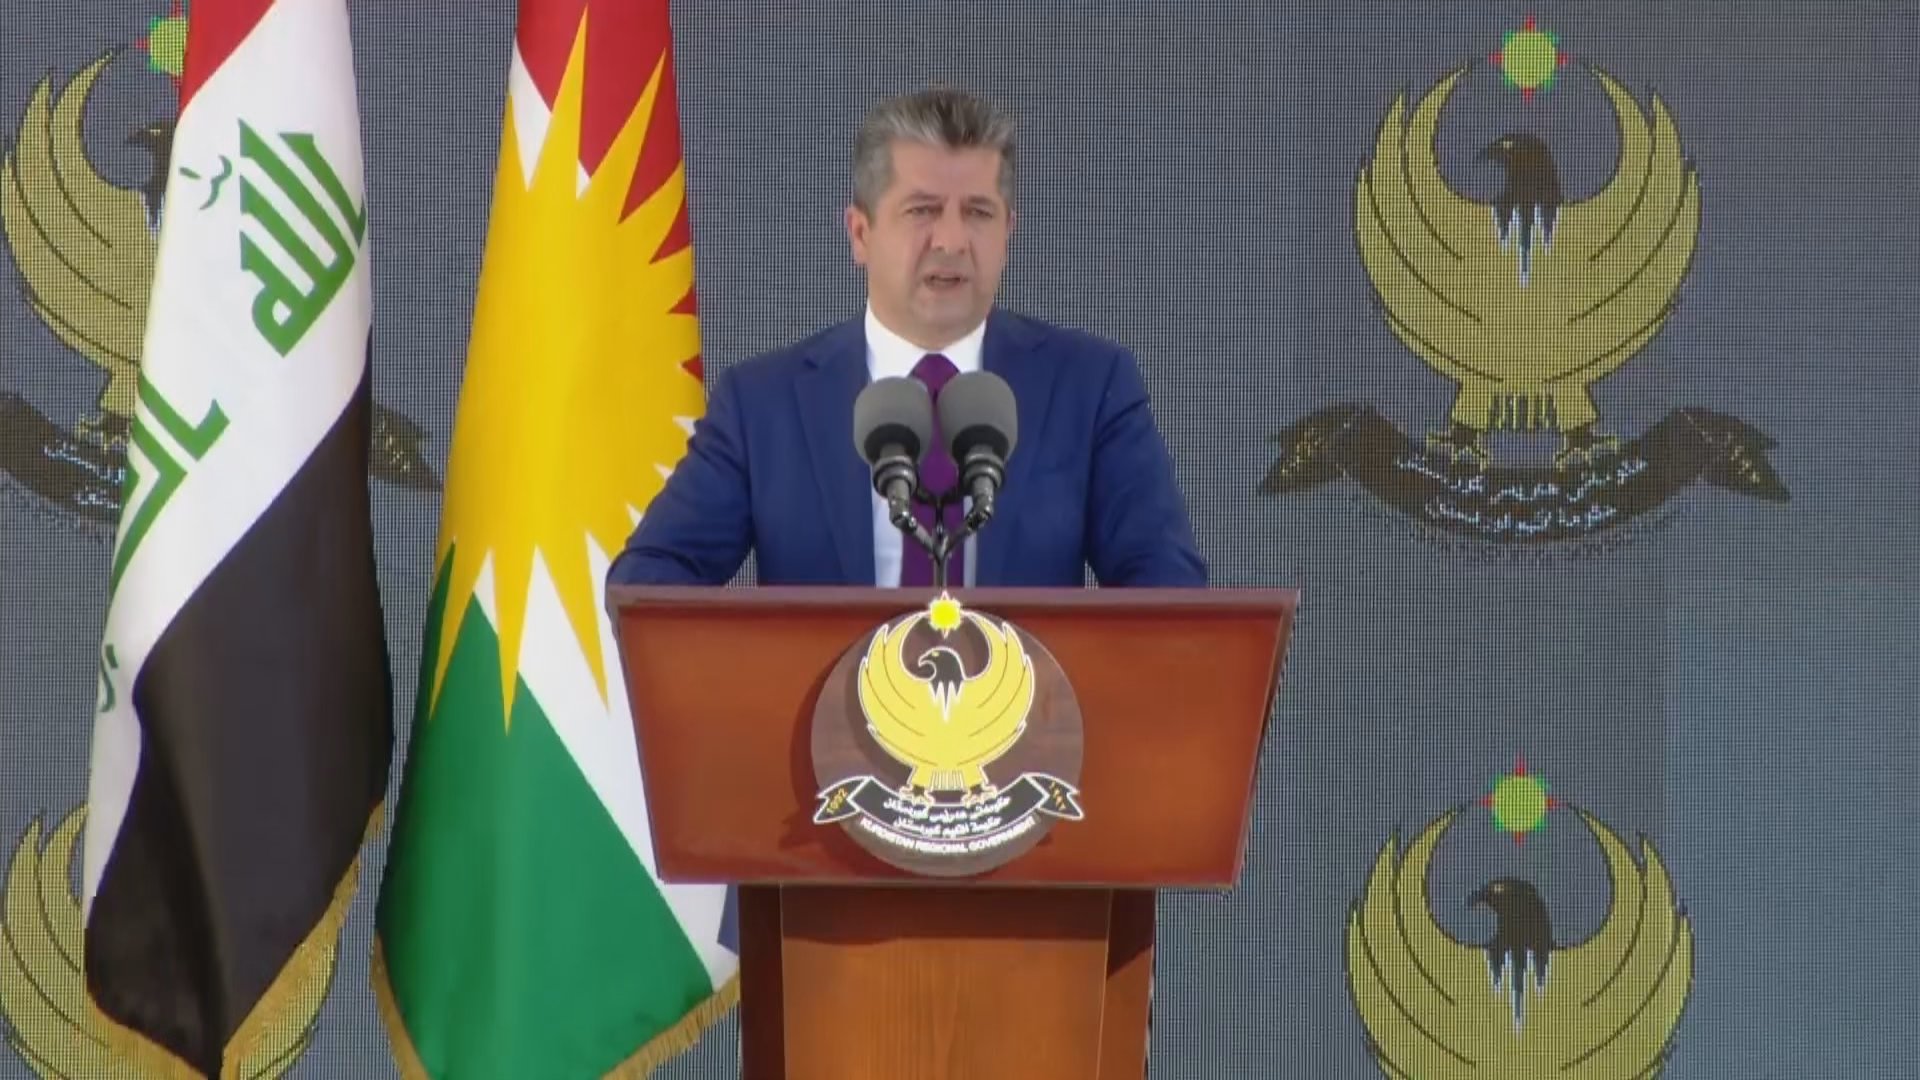 Kurdistan’s Prime Minister wishes Christians holidays full of joys and delights